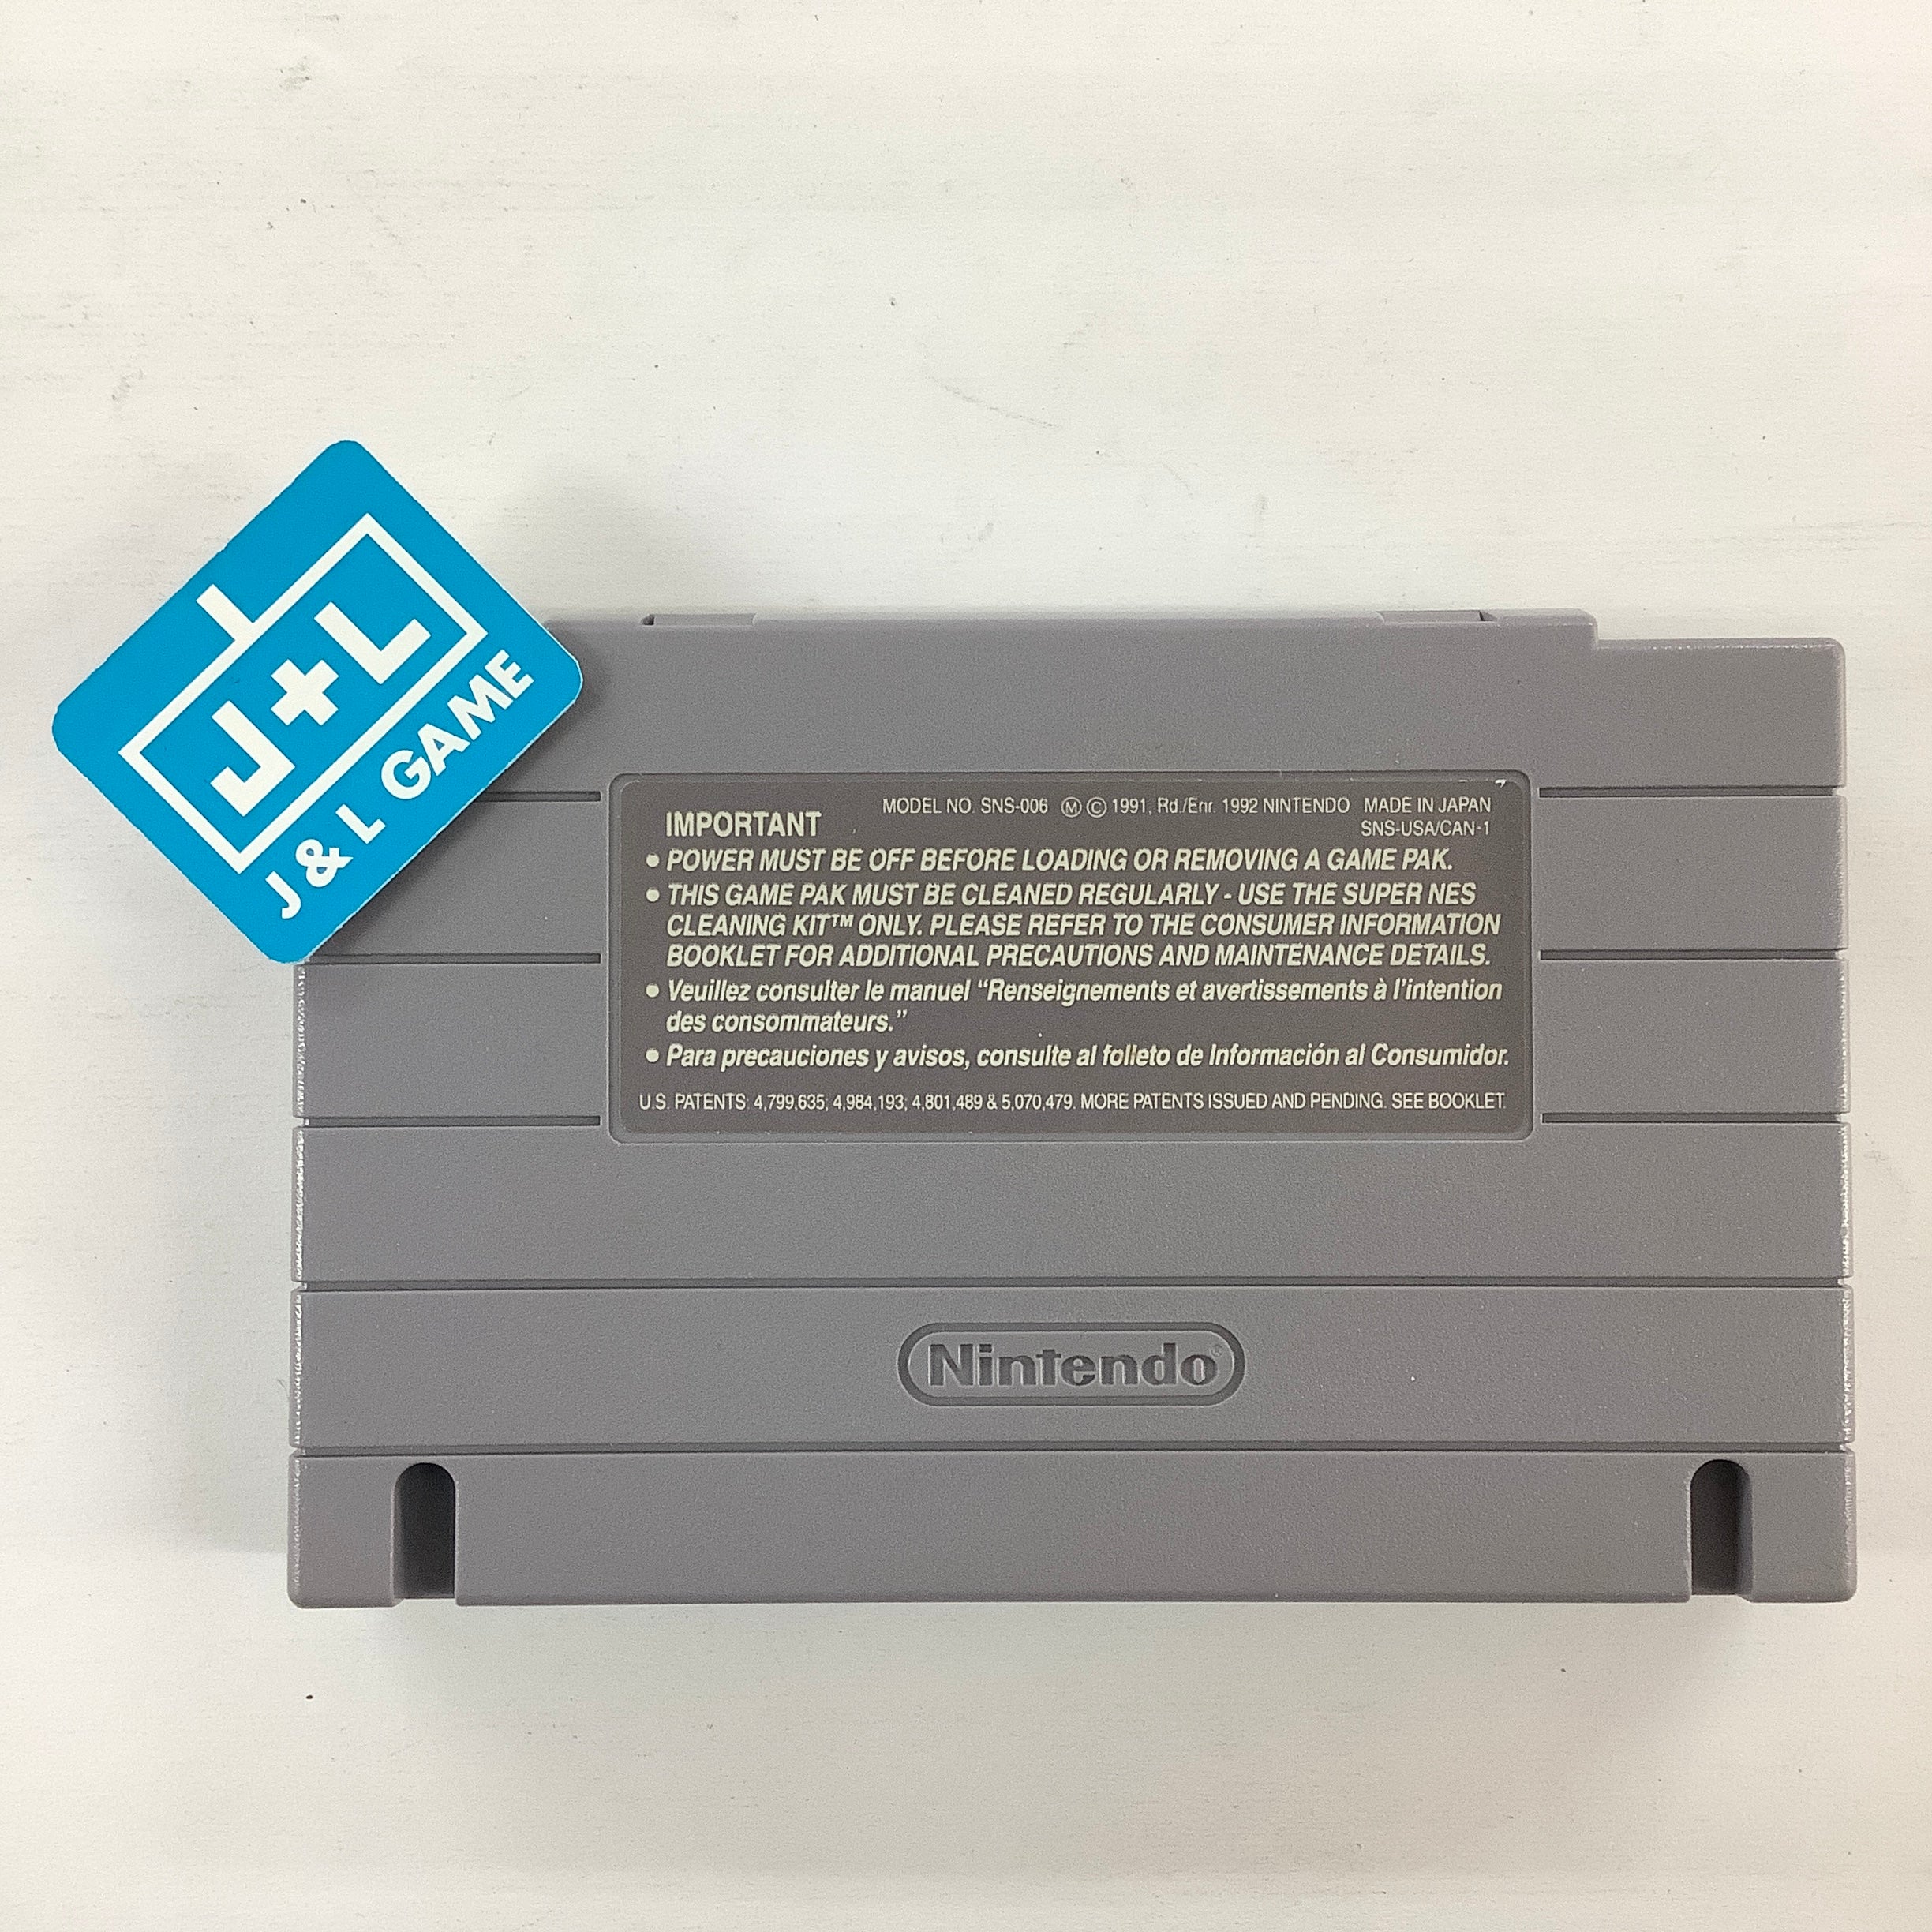 Super Bases Loaded 3: License to Steal - (SNES) Super Nintendo [Pre-Owned] Video Games Jaleco Entertainment   